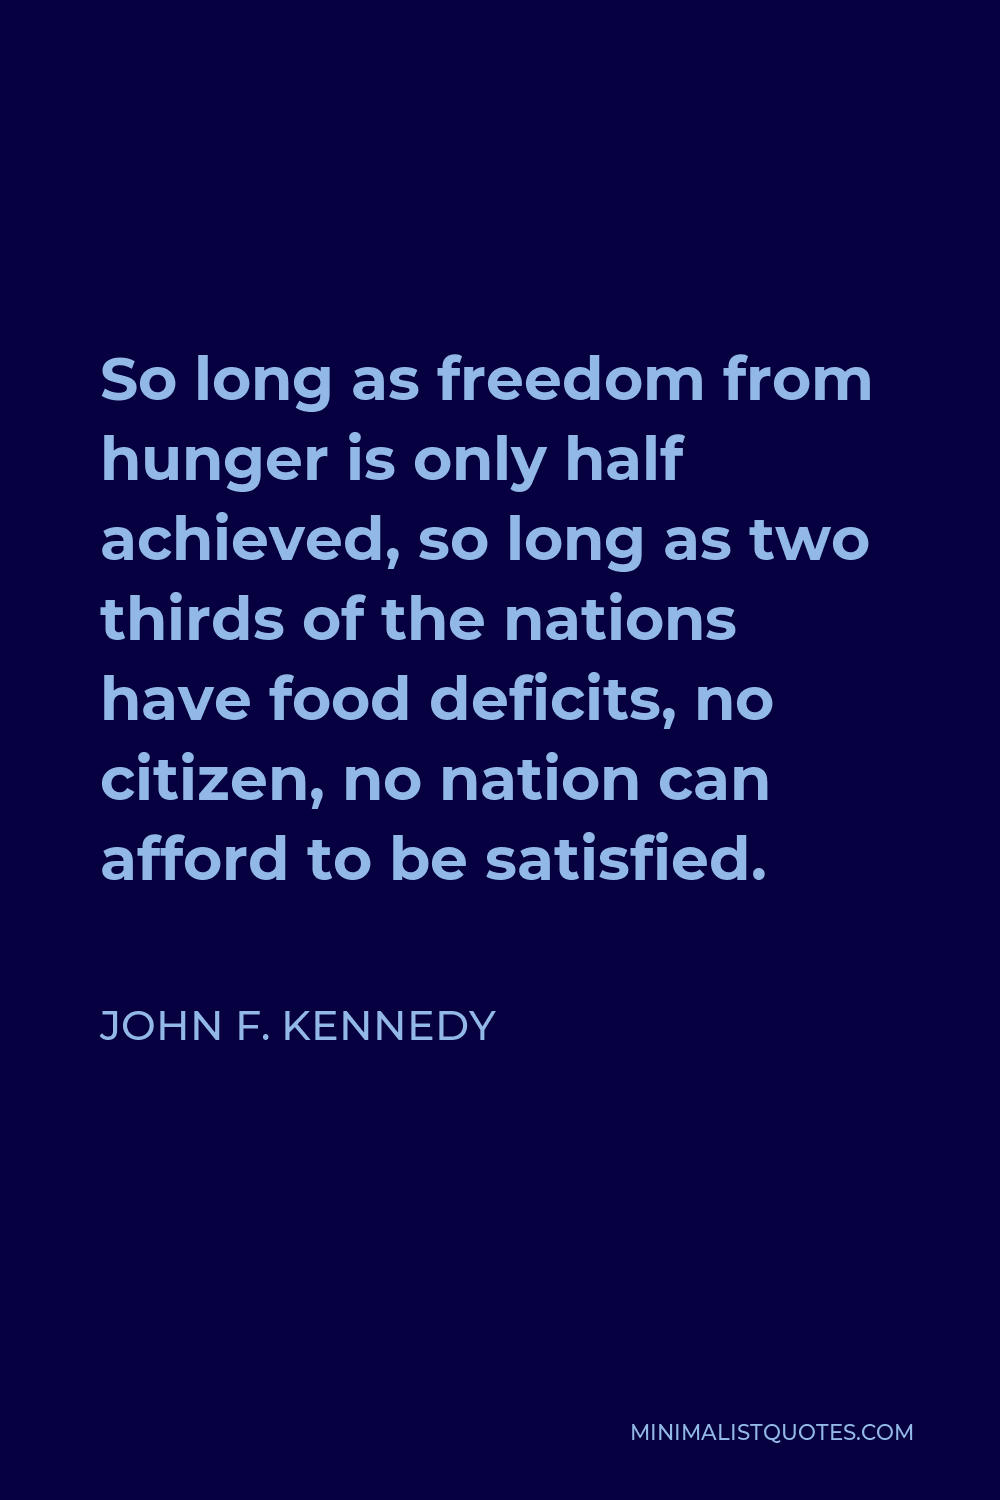 John F. Kennedy Quote - So long as freedom from hunger is only half achieved, so long as two thirds of the nations have food deficits, no citizen, no nation can afford to be satisfied.